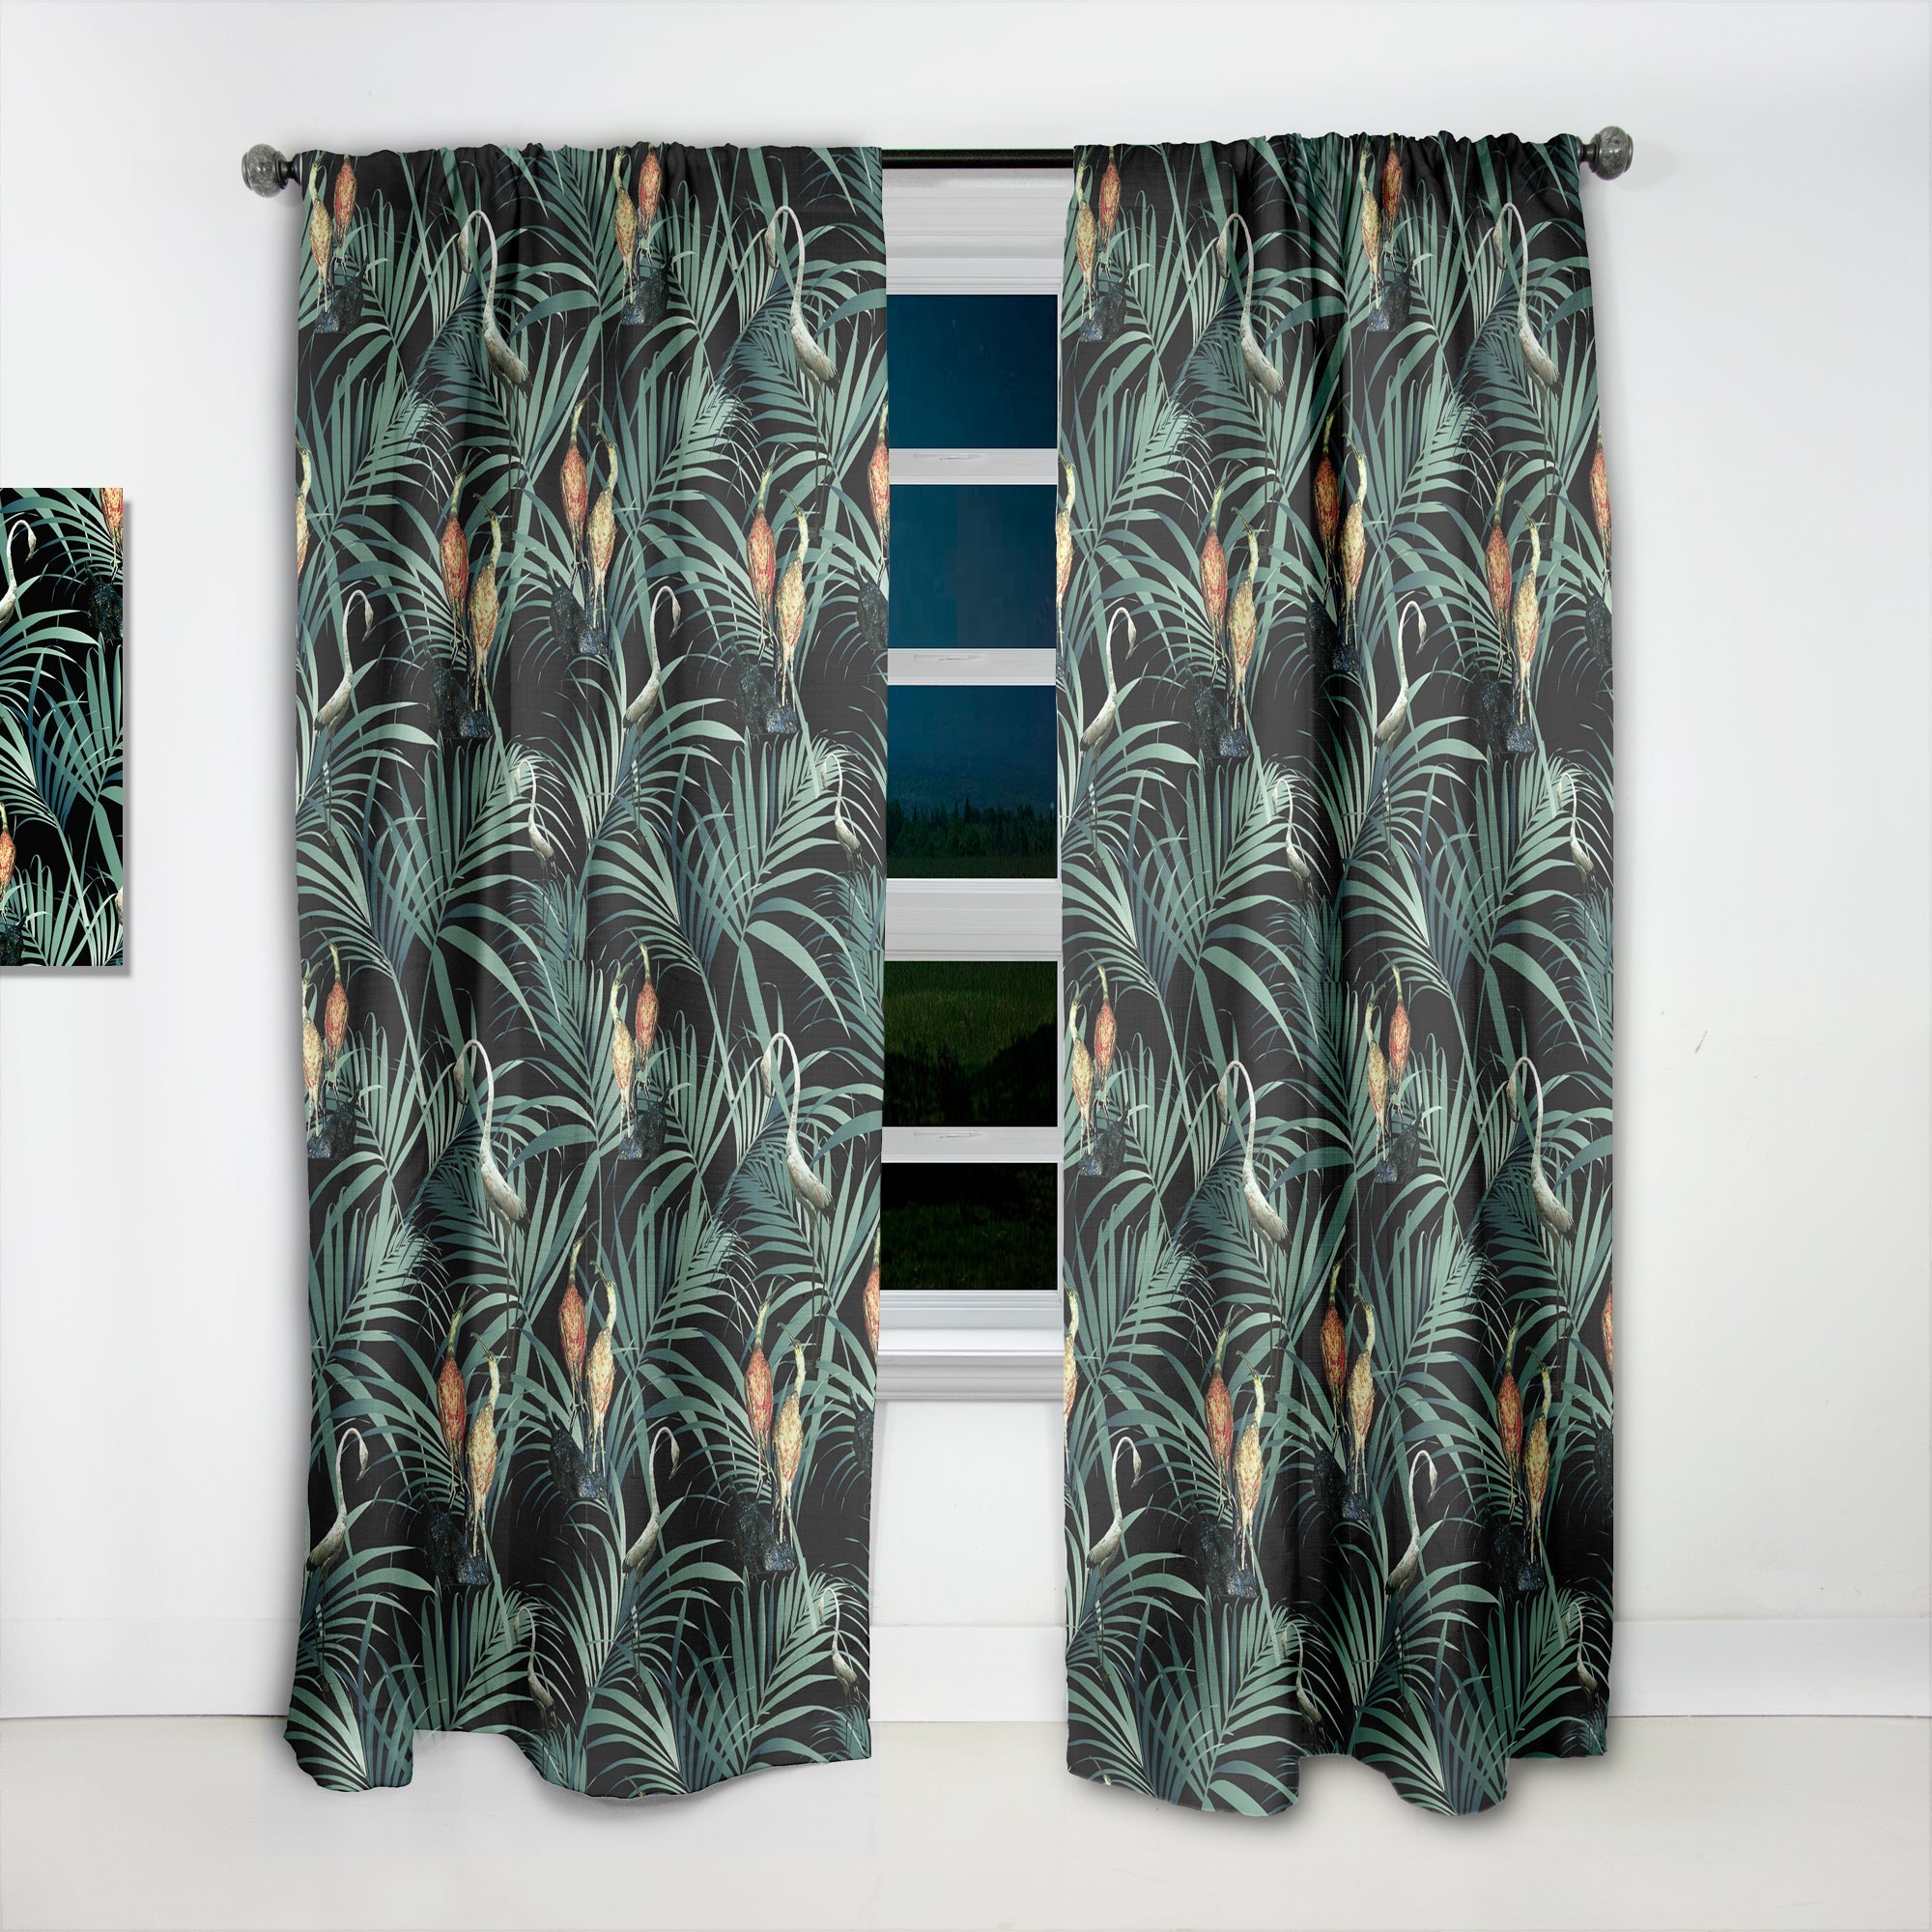 Tropical Yellow Birds On Black With Green Jungle Leaves' Abstract Curtain Panel